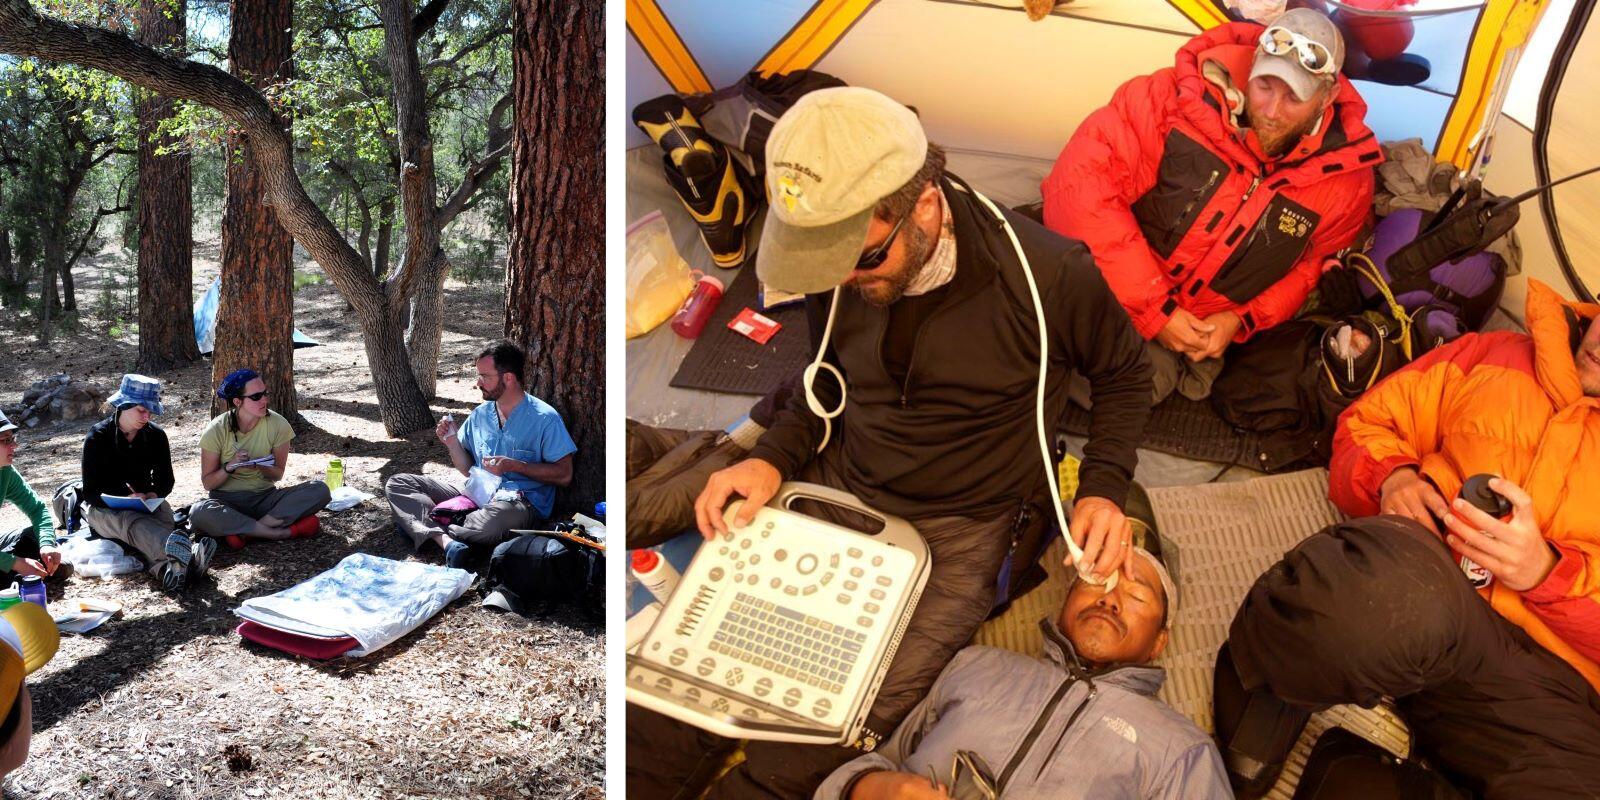 On the left is a photo of several people sitting on the ground in a forest. On the right is a photo of three people sitting on the bottom on a tent, and one person laying down. 